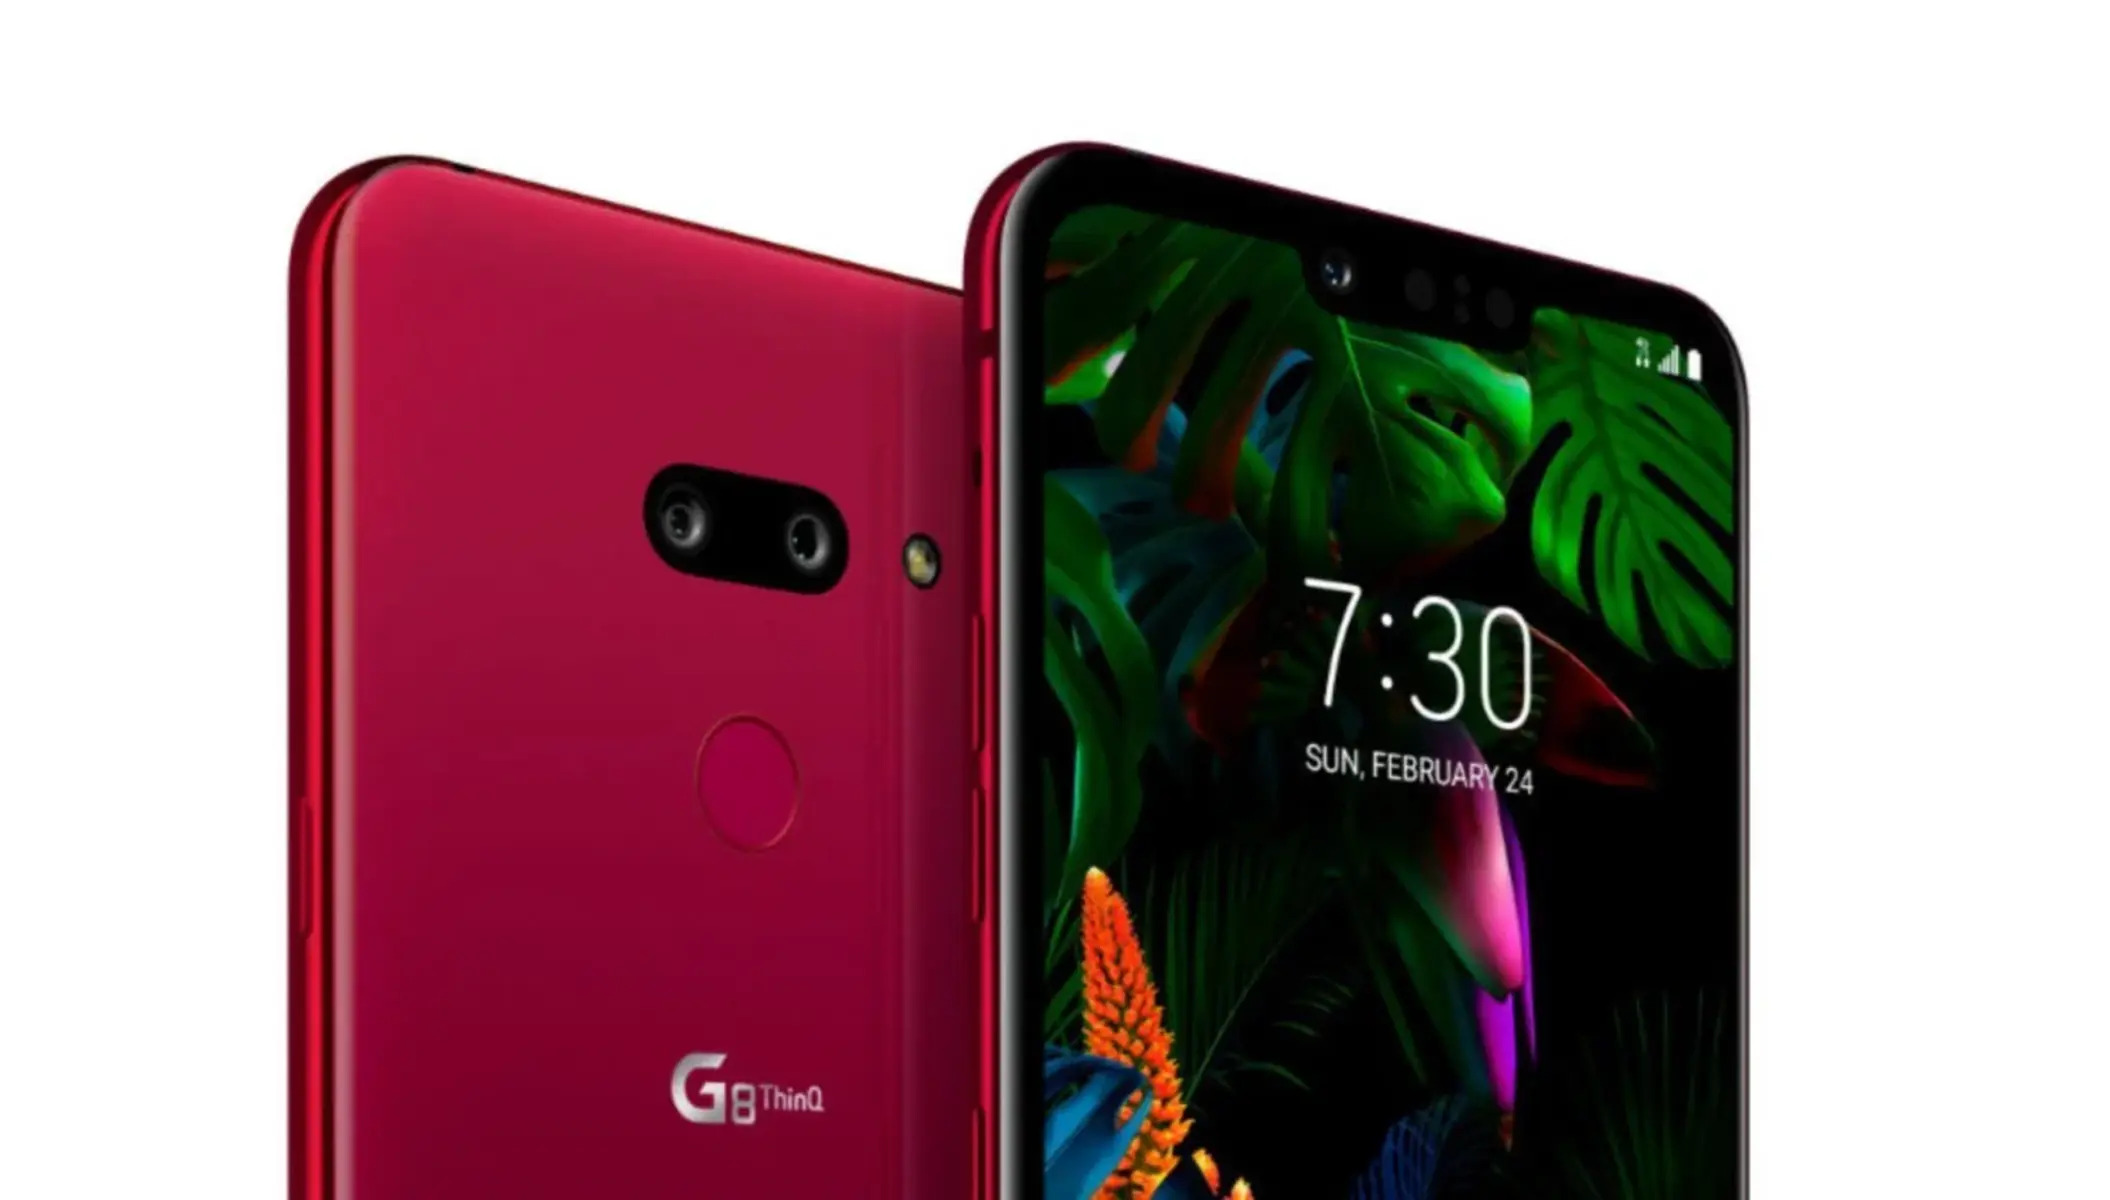 Starting Fresh: Factory Reset Guide For LG G8 ThinQ